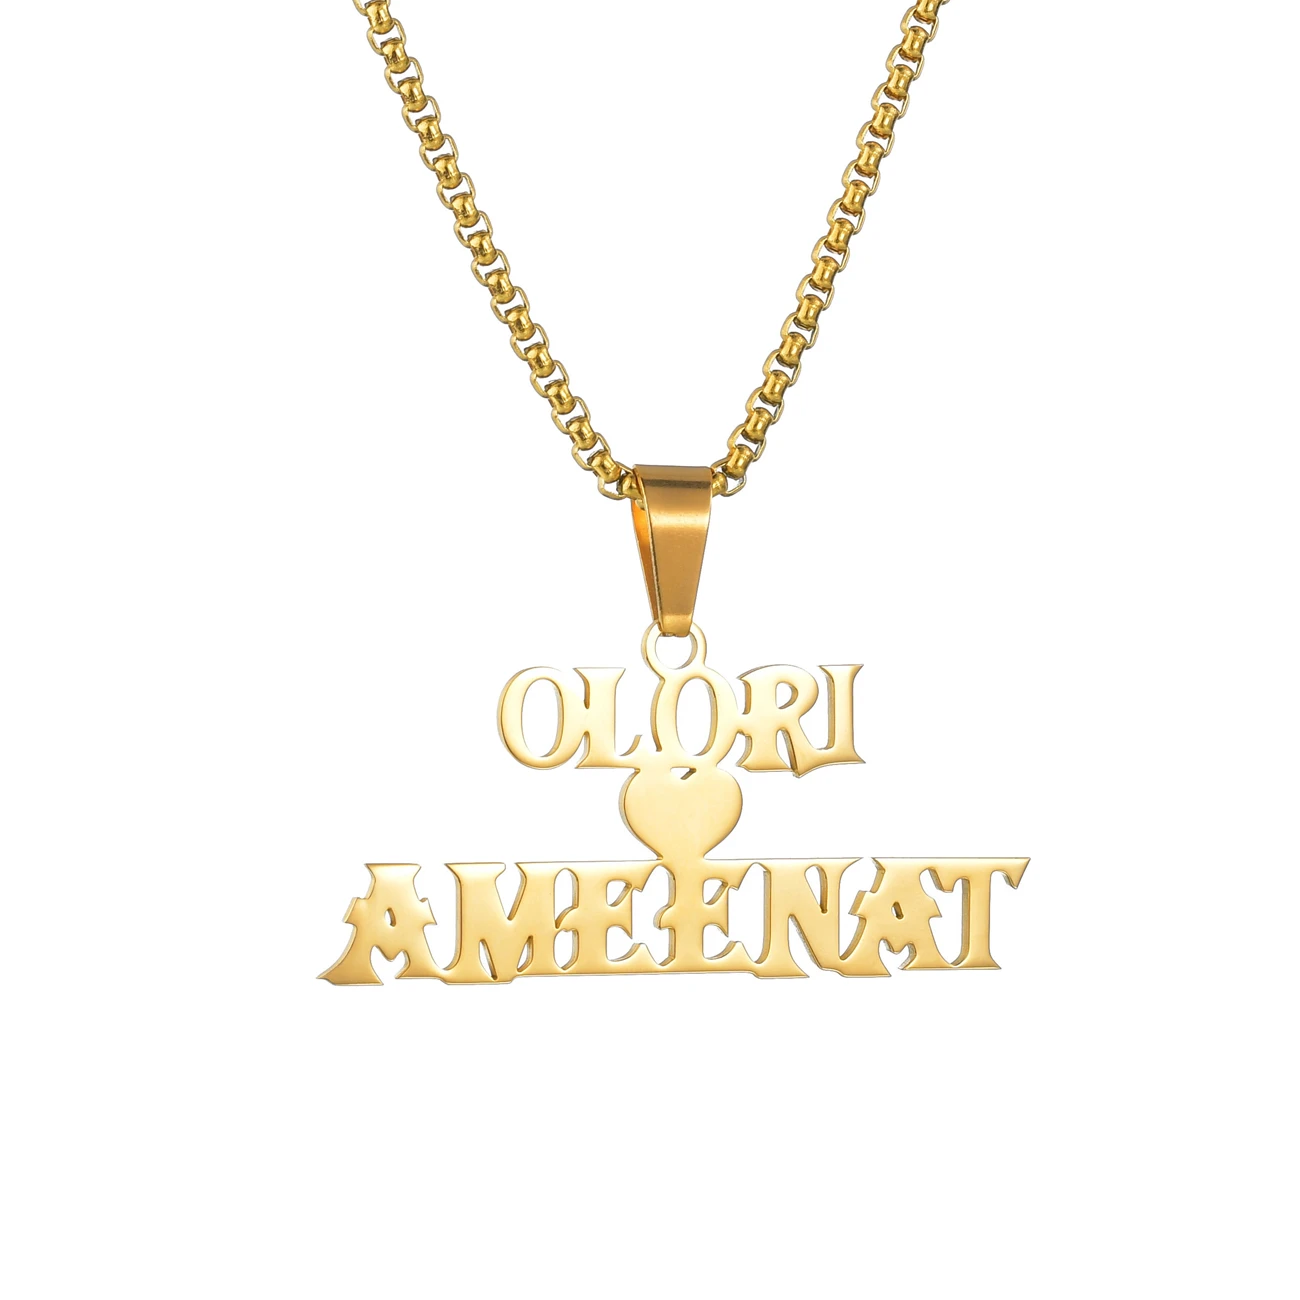 Acheerup New Personalized Custom Names Necklace for Men Women Stainless Steel Detachable Thick Cuban Chain Pendant Jewelry Gift images - 6